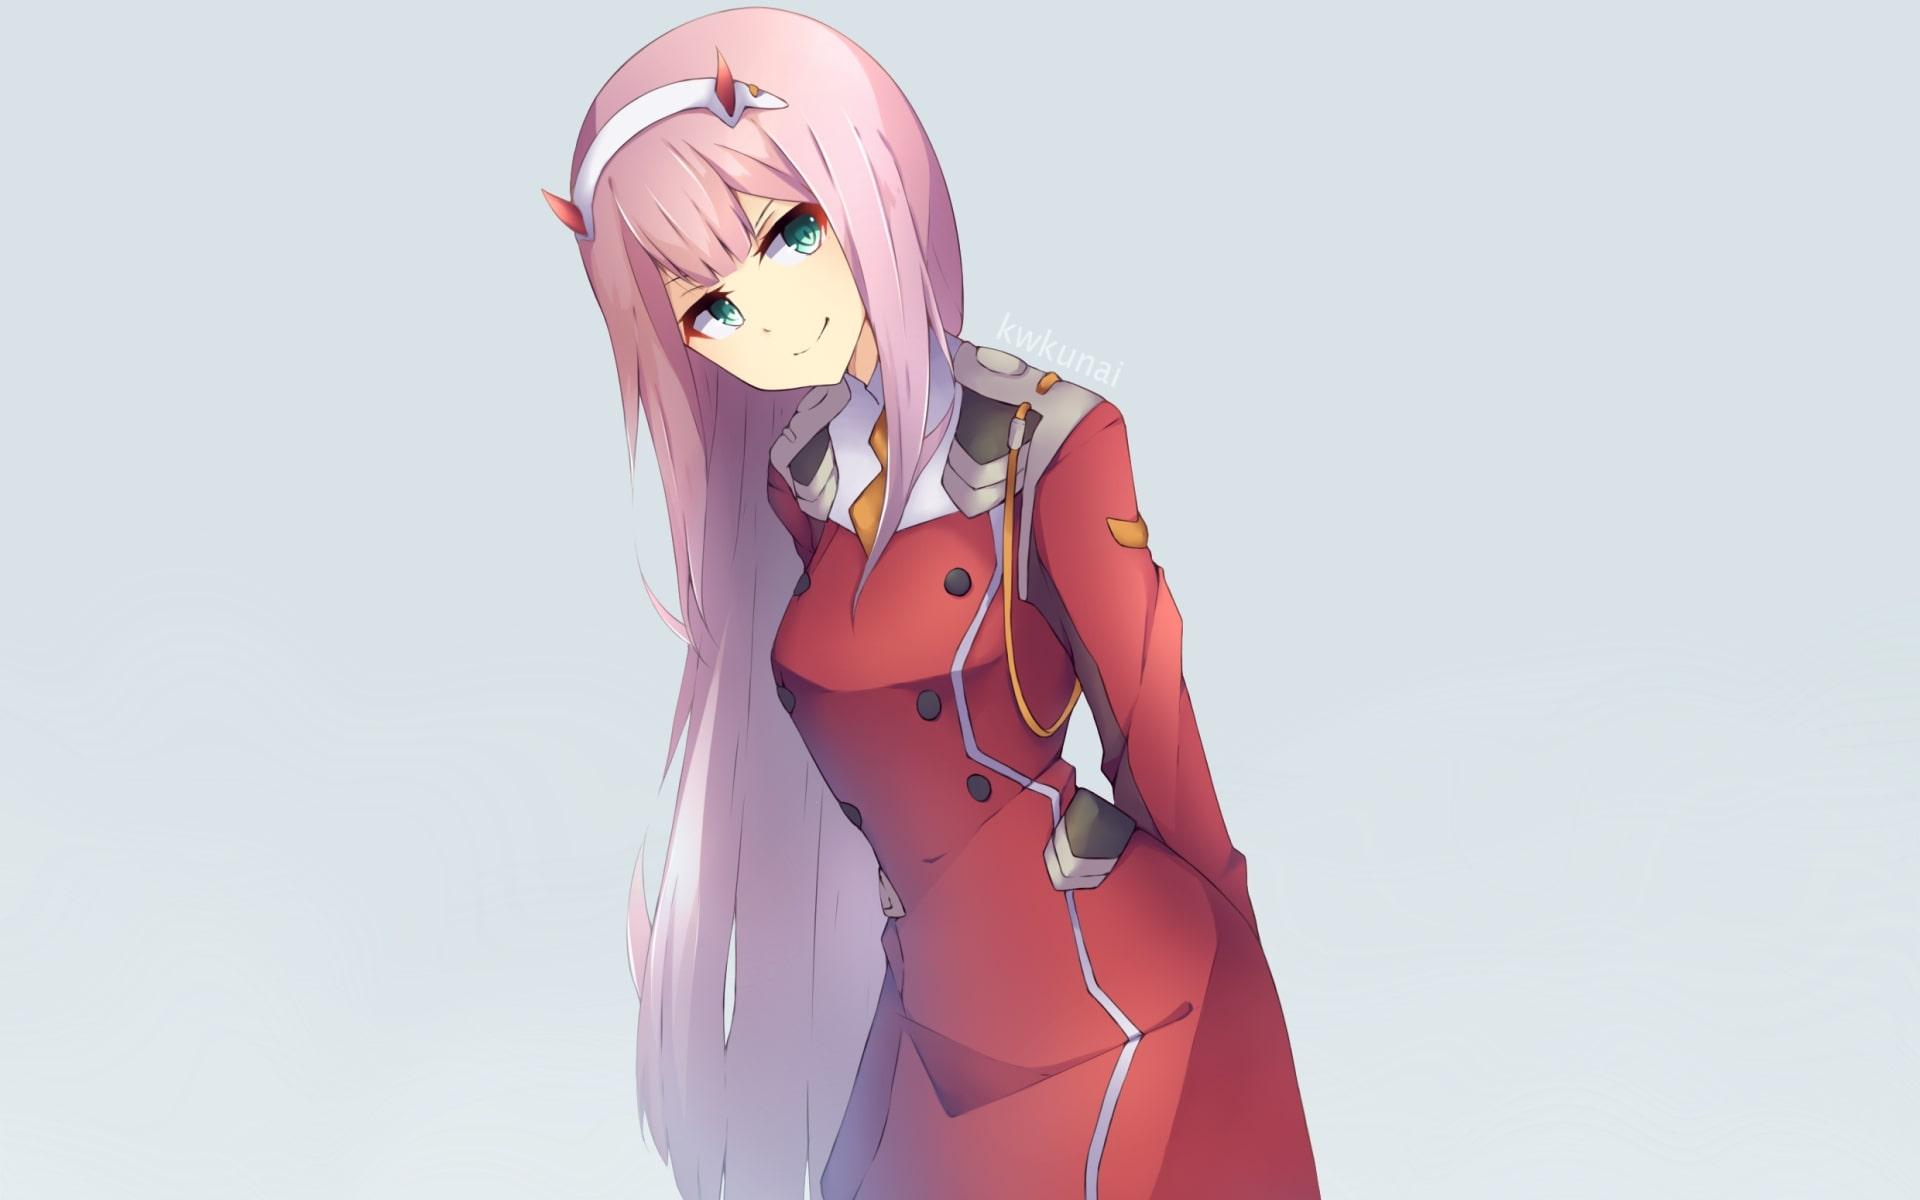 Wallpaper of Anime, Darling in the FranXX, Zero Two, 02 background